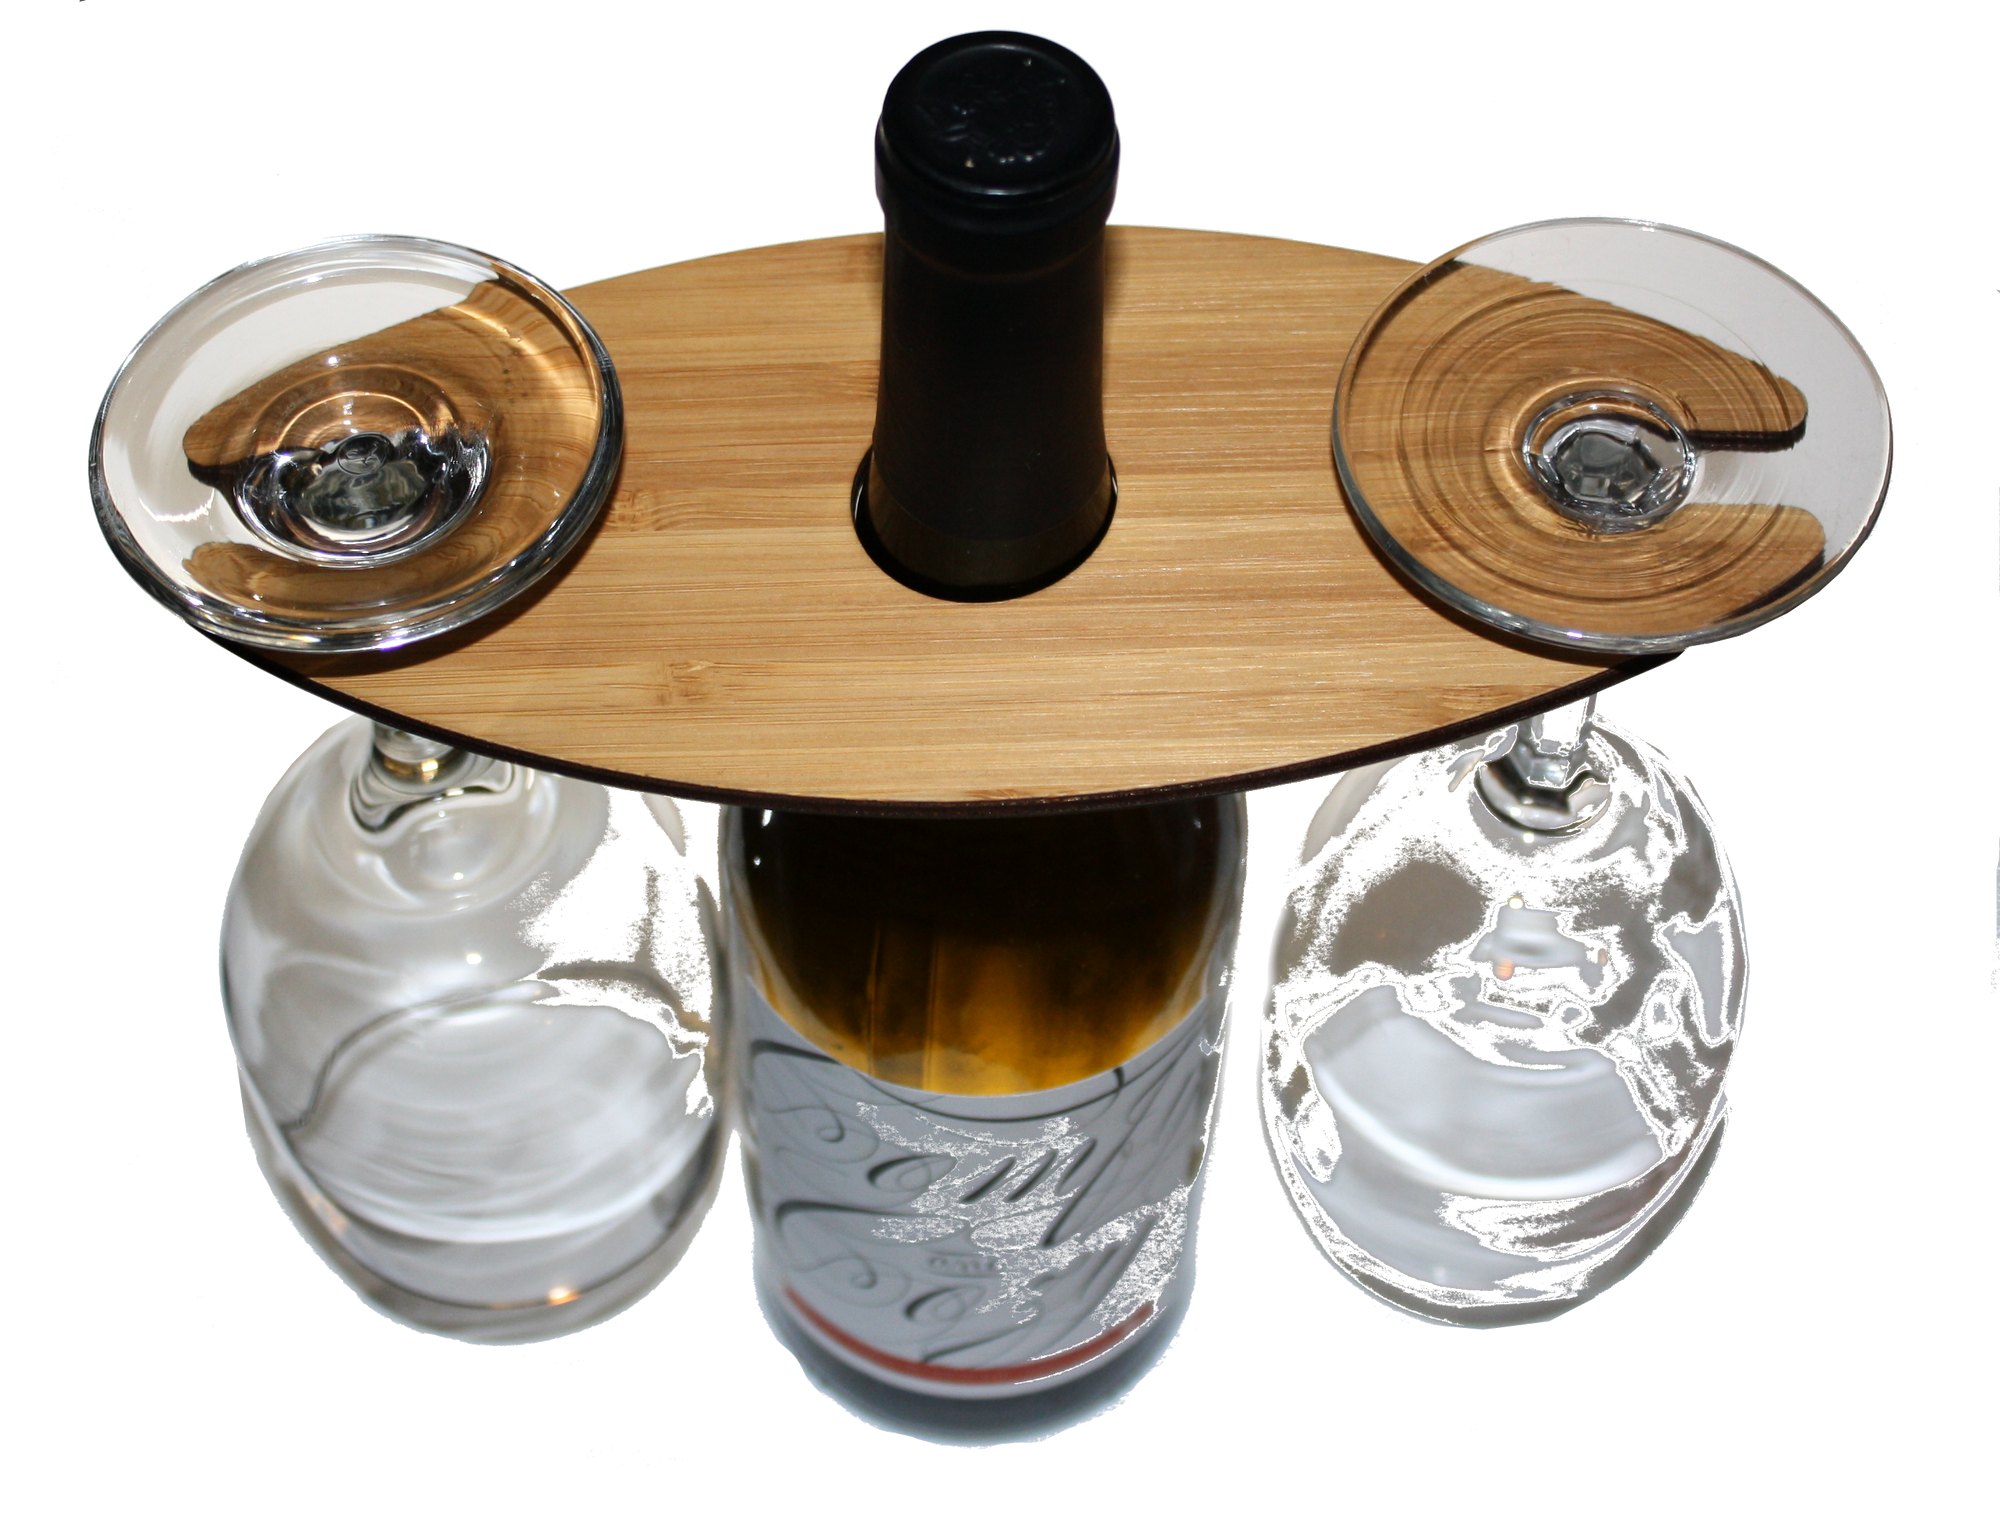 Wooden Wine Glass Caddy - Two Glass